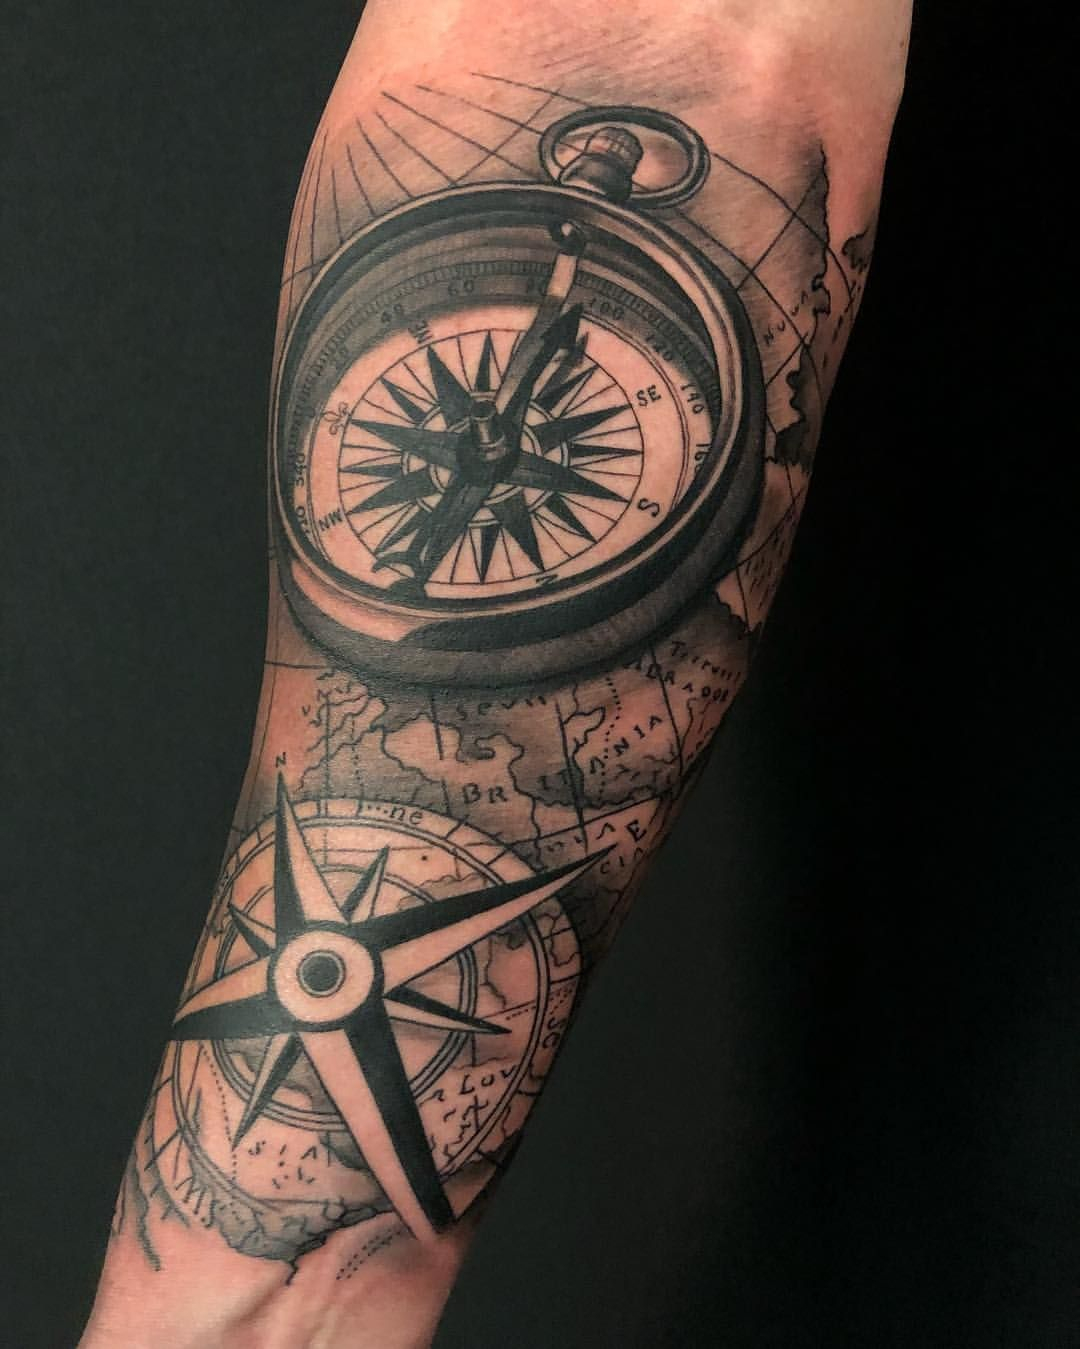 Cool Nautical Theme Tattoo Today Nautical Nauticaltattoo intended for dimensions 1080 X 1349